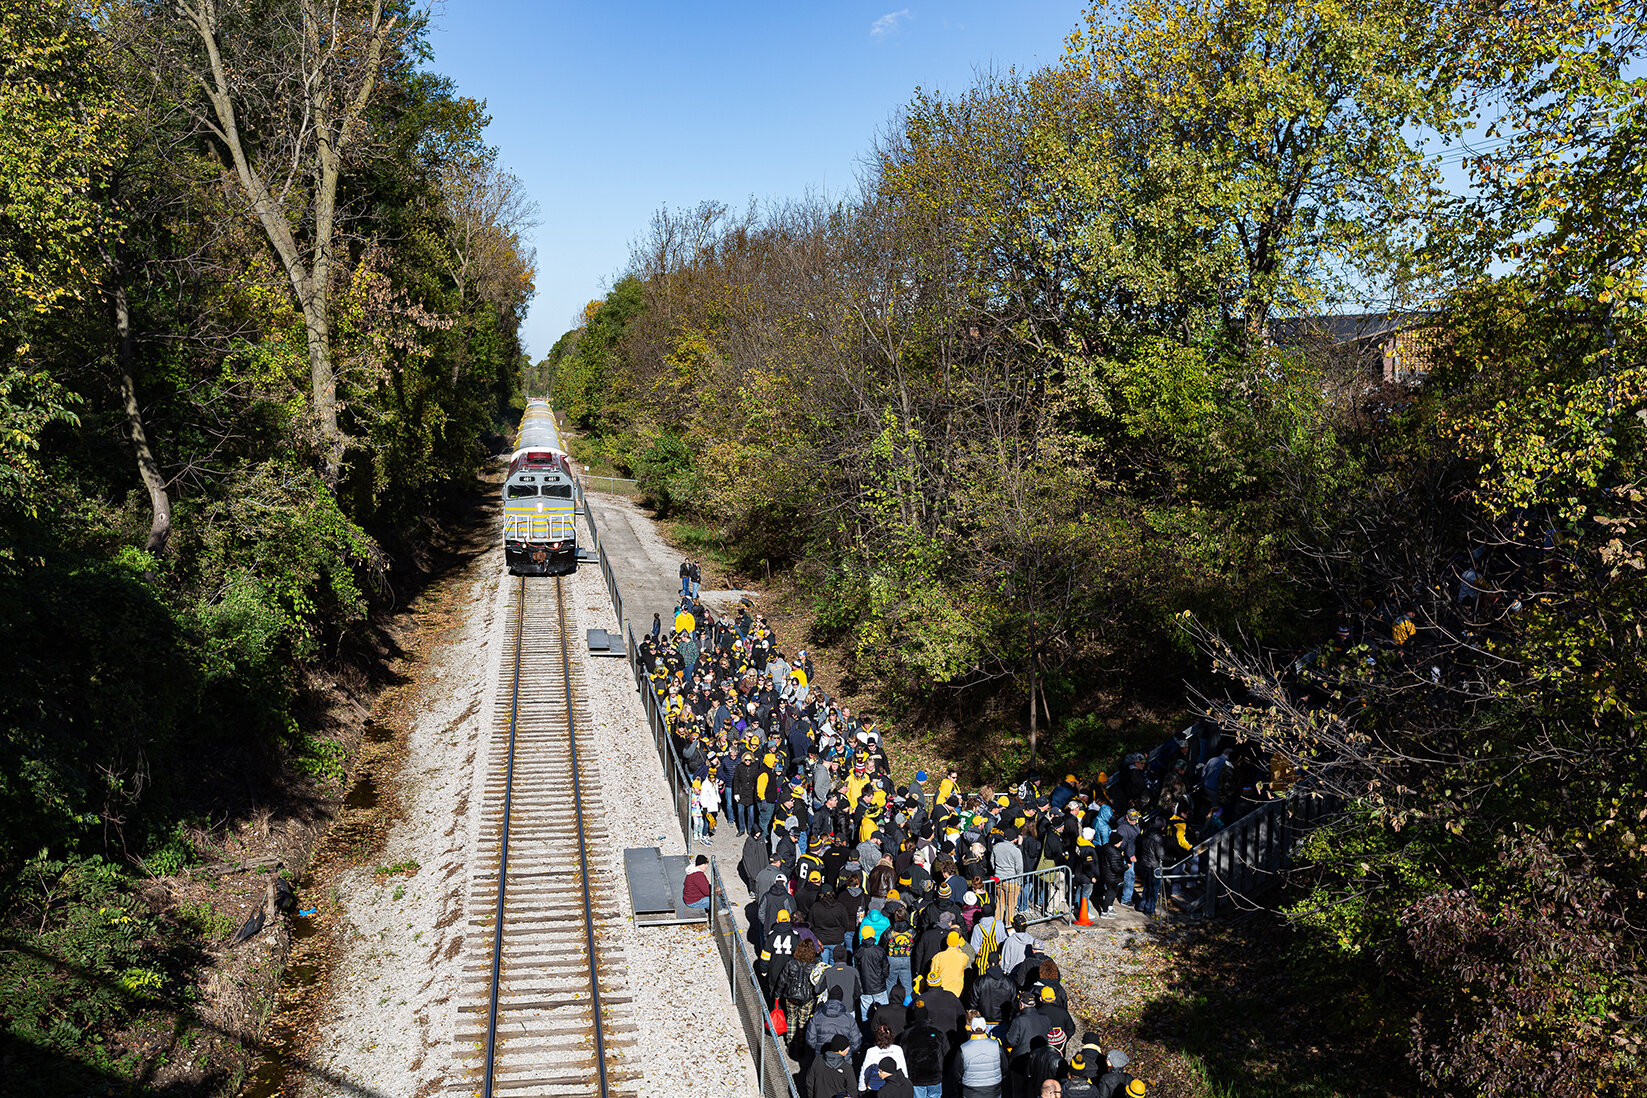  Fans wait to climb the stairs to Kinnick Stadium as the Hawkeye Express departs for another trip back to Coralville, IA  on Saturday, Oct. 20, 2018.  